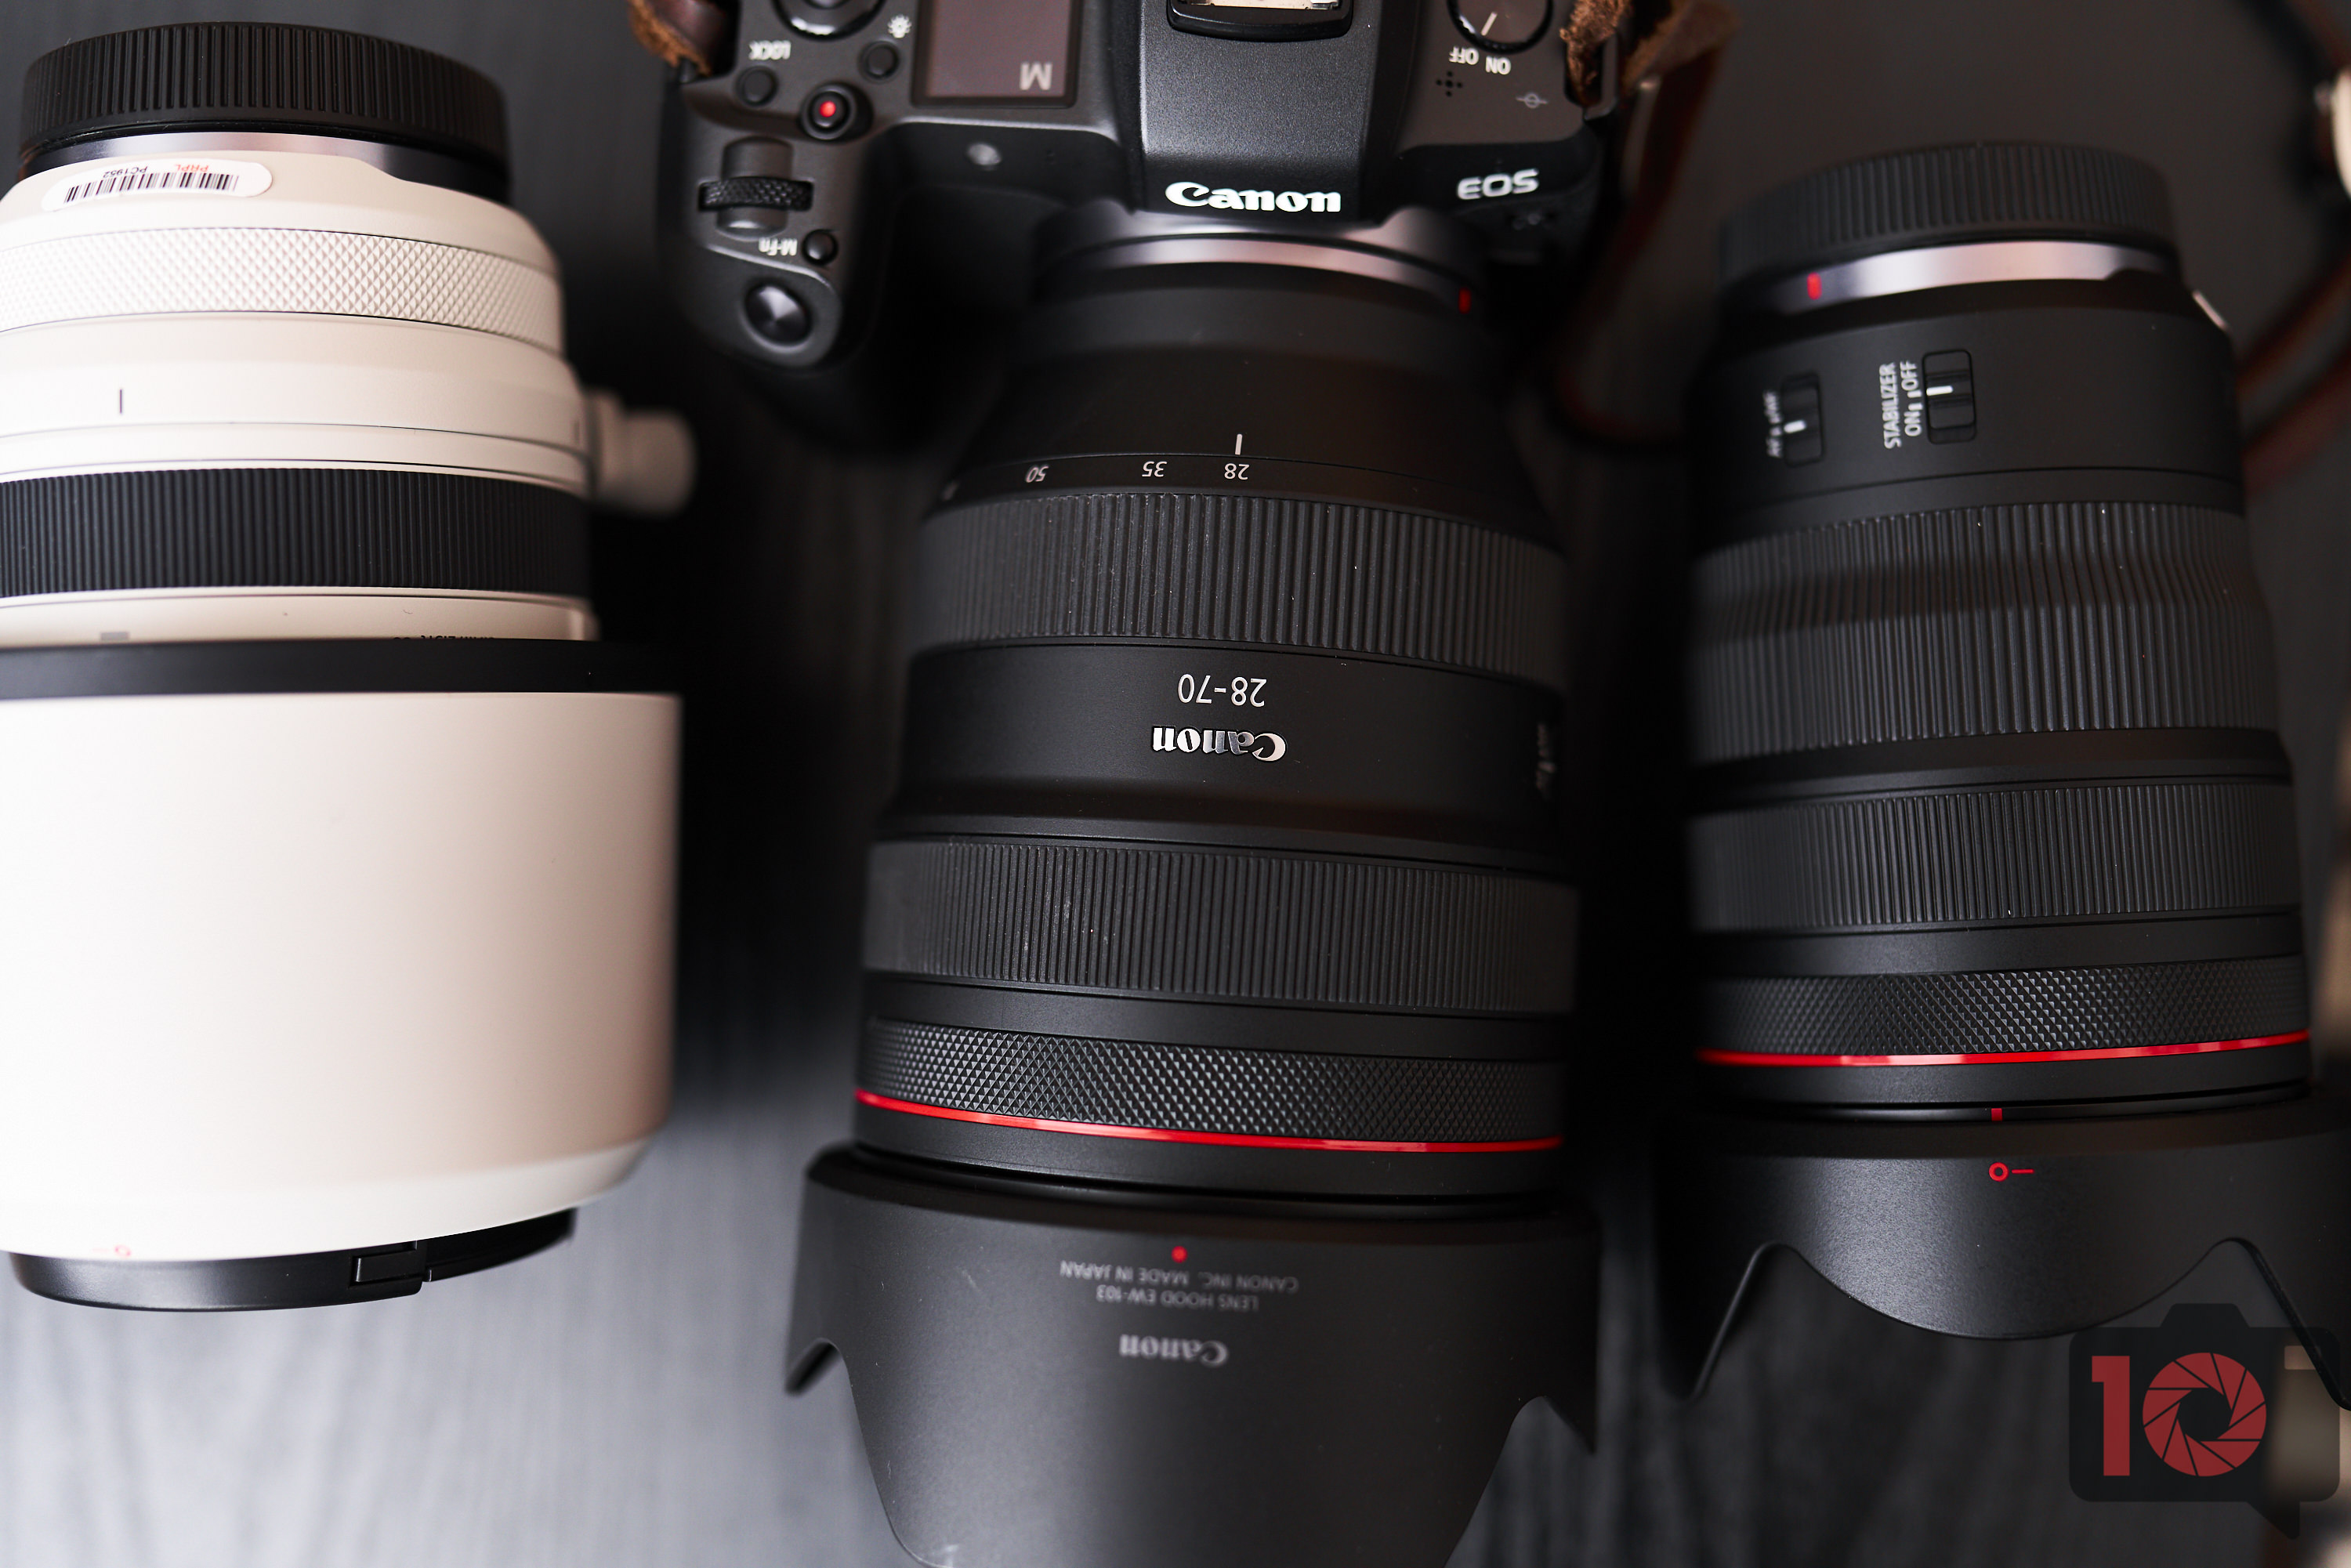 Chris Gampat The Phoblographer Canon RF 28-70mm f2 L USM Product images review 2.21-50s400 1